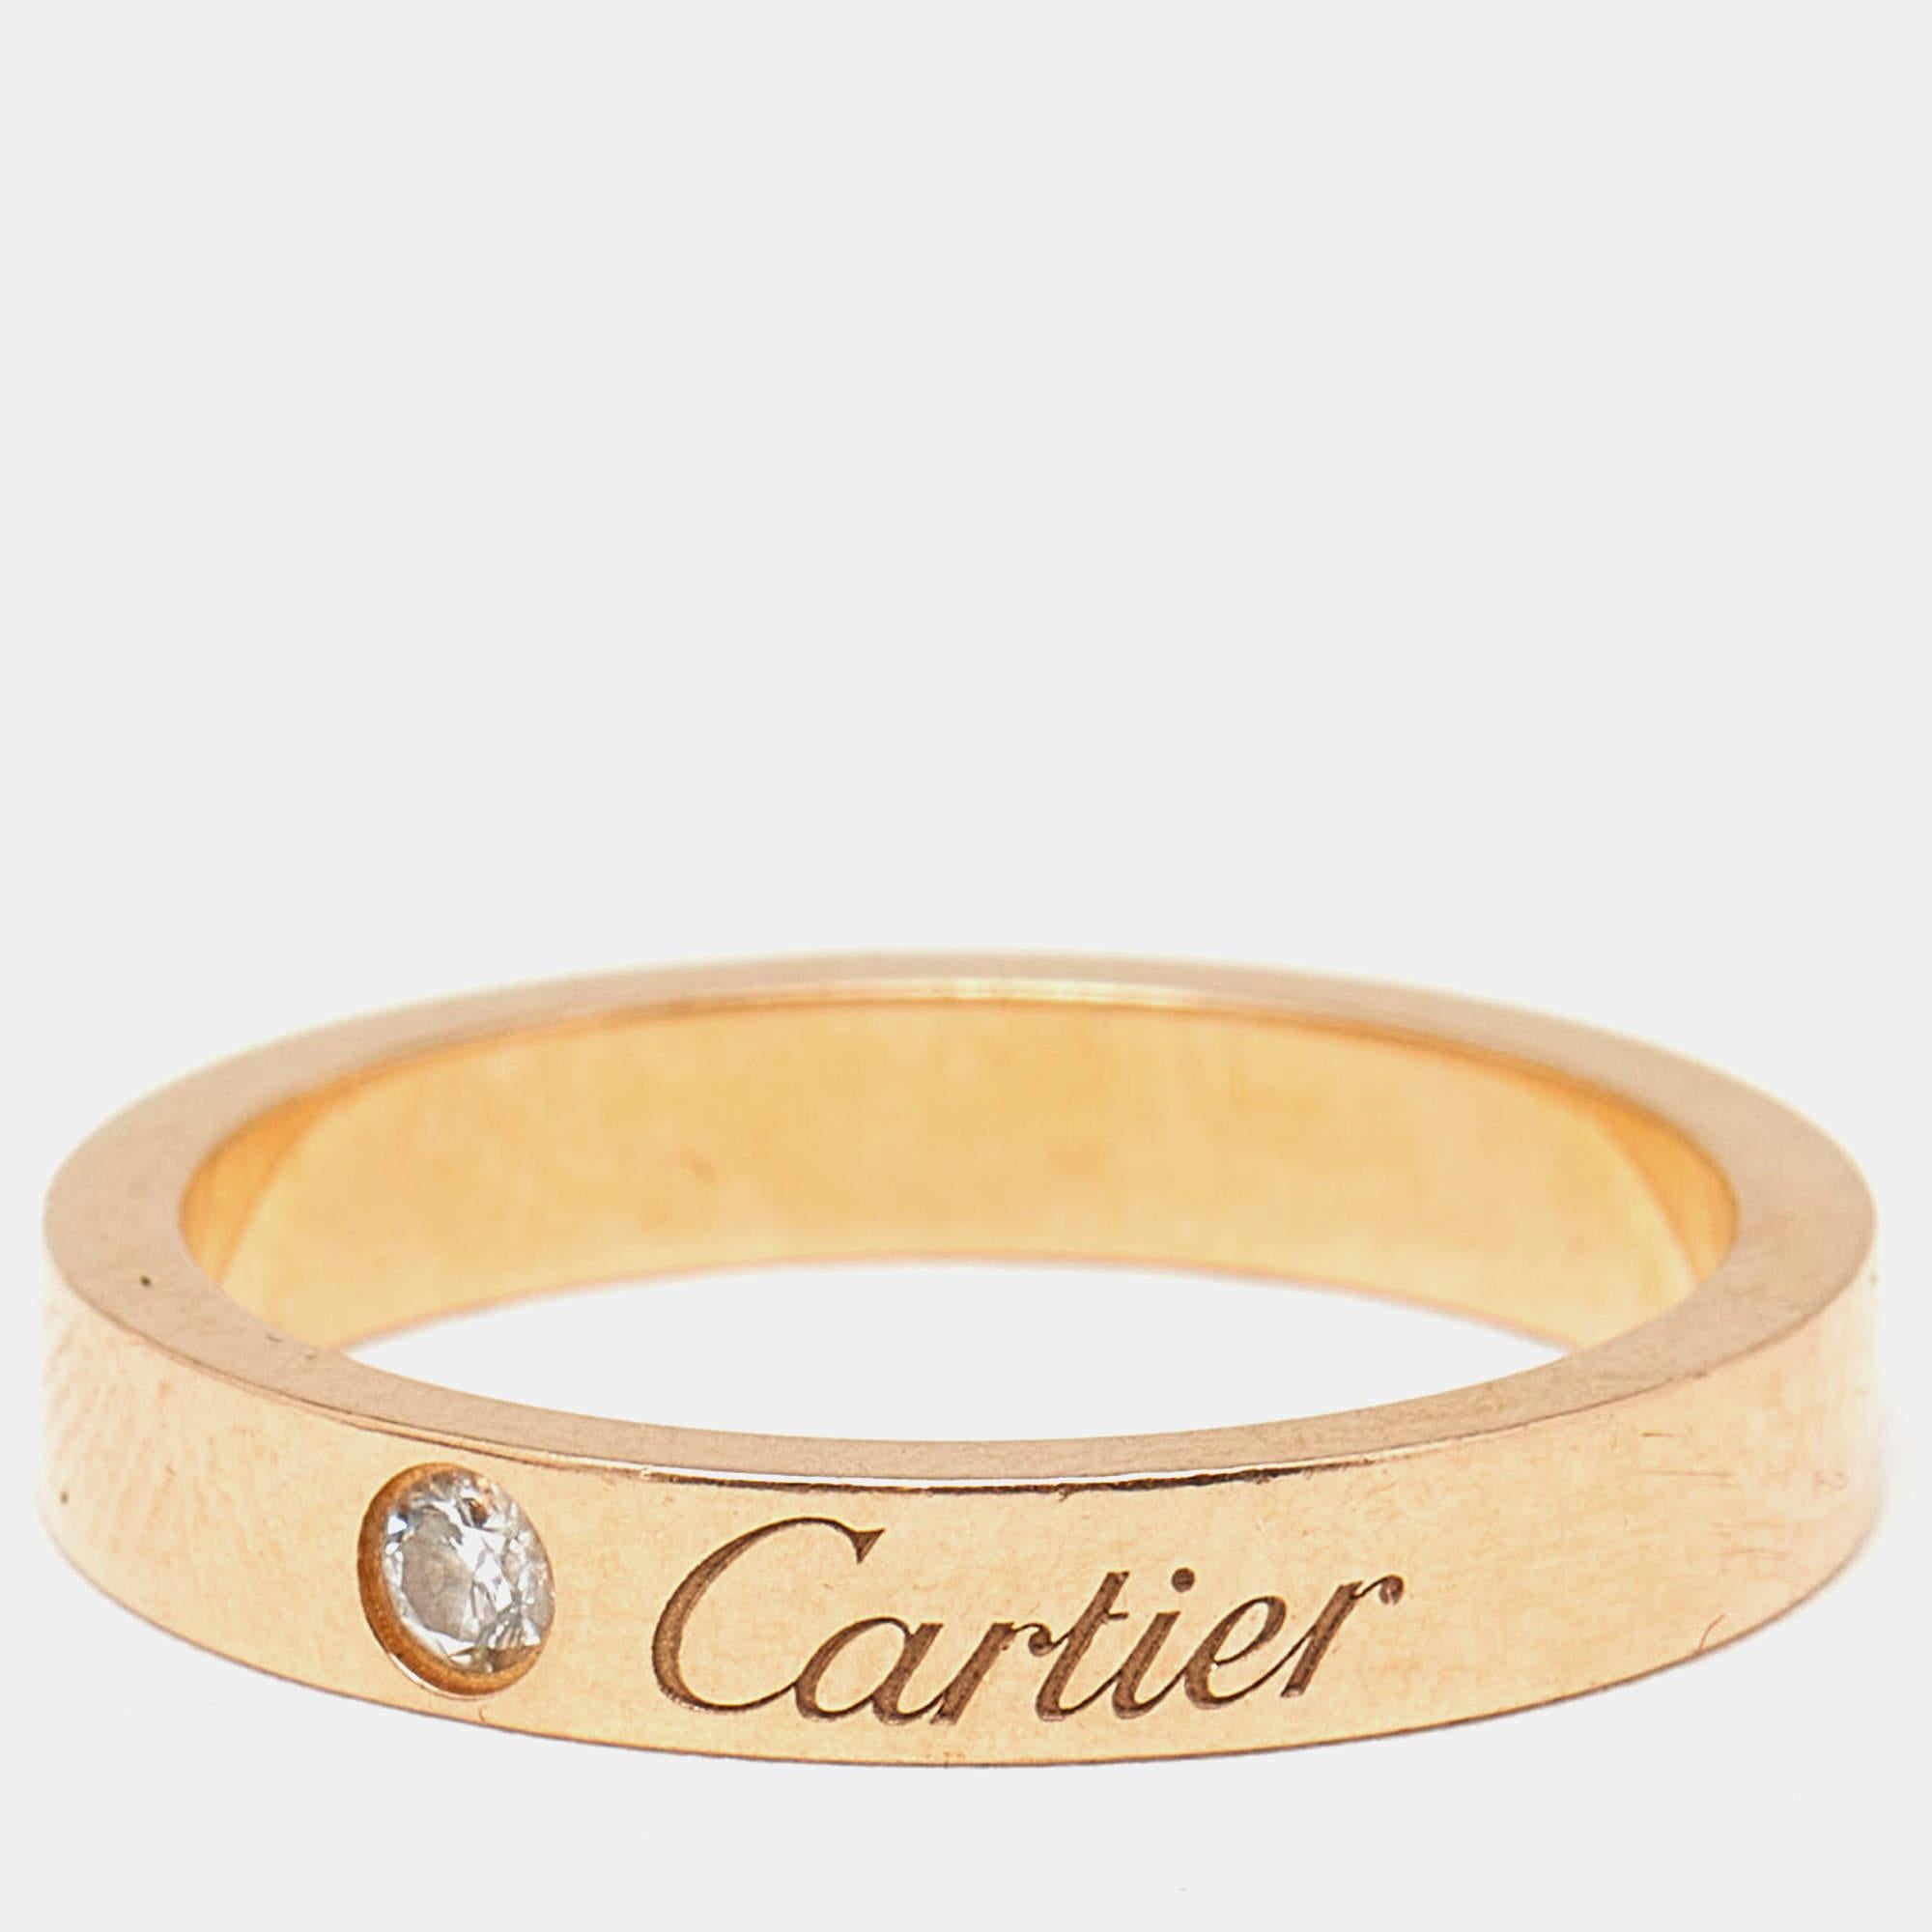 Let this C de Cartier band ring be a favored choice when it comes to choosing a ring for daily wear. The ring is made from 18k rose gold and is highlighted by brand engravings and a single diamond. It will be a prized accessory you will love wearing